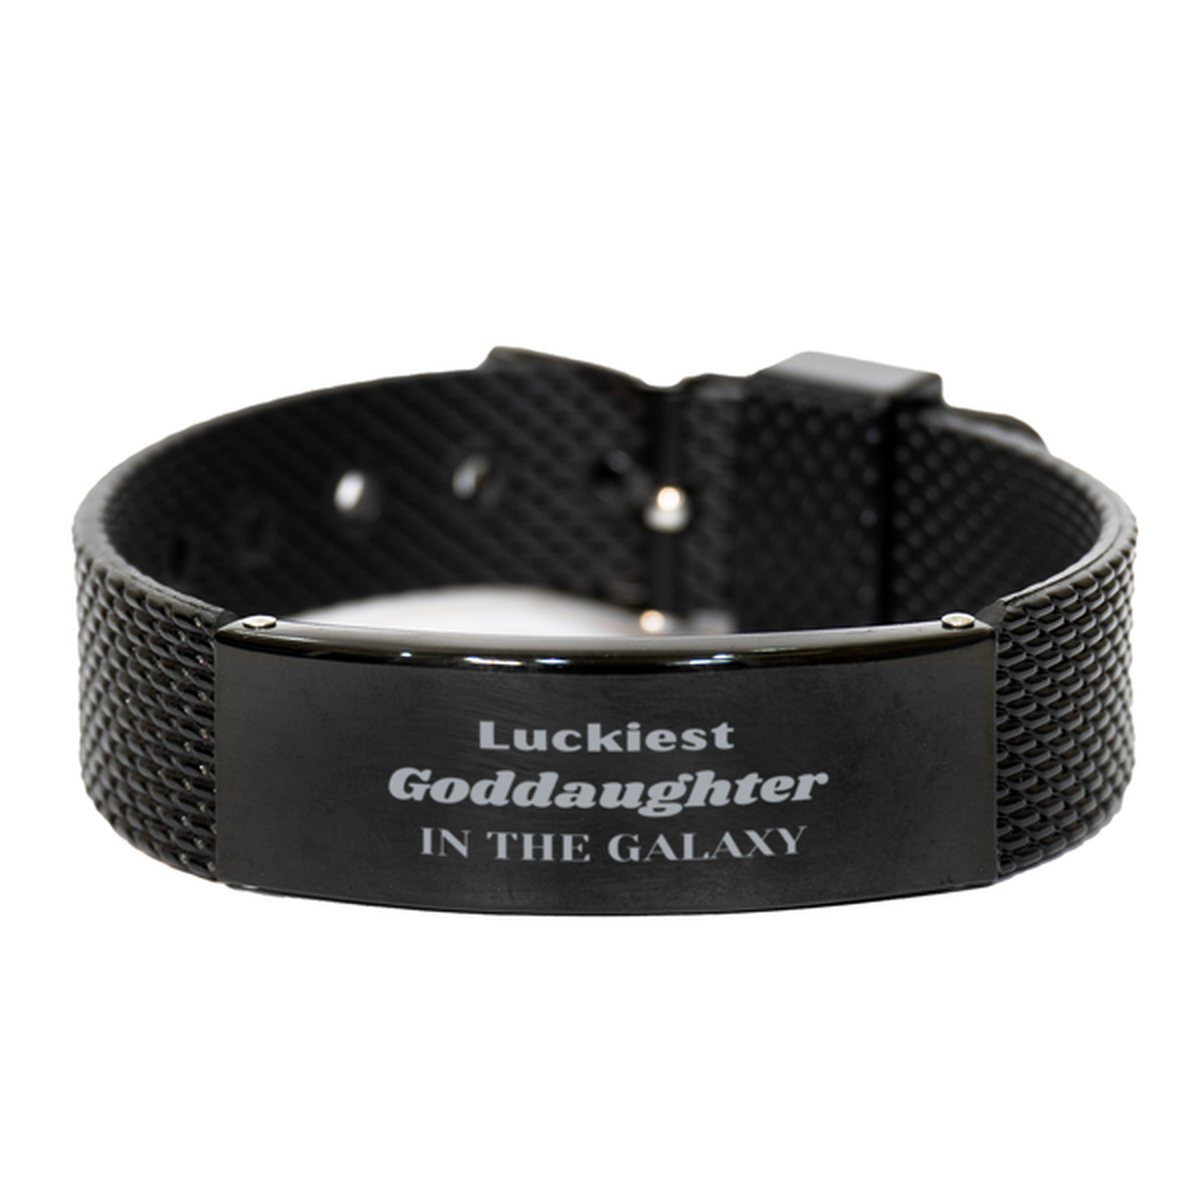 Luckiest Goddaughter in the Galaxy, To My Goddaughter Engraved Gifts, Christmas Goddaughter Black Shark Mesh Bracelet Gifts, X-mas Birthday Unique Gifts For Goddaughter Men Women